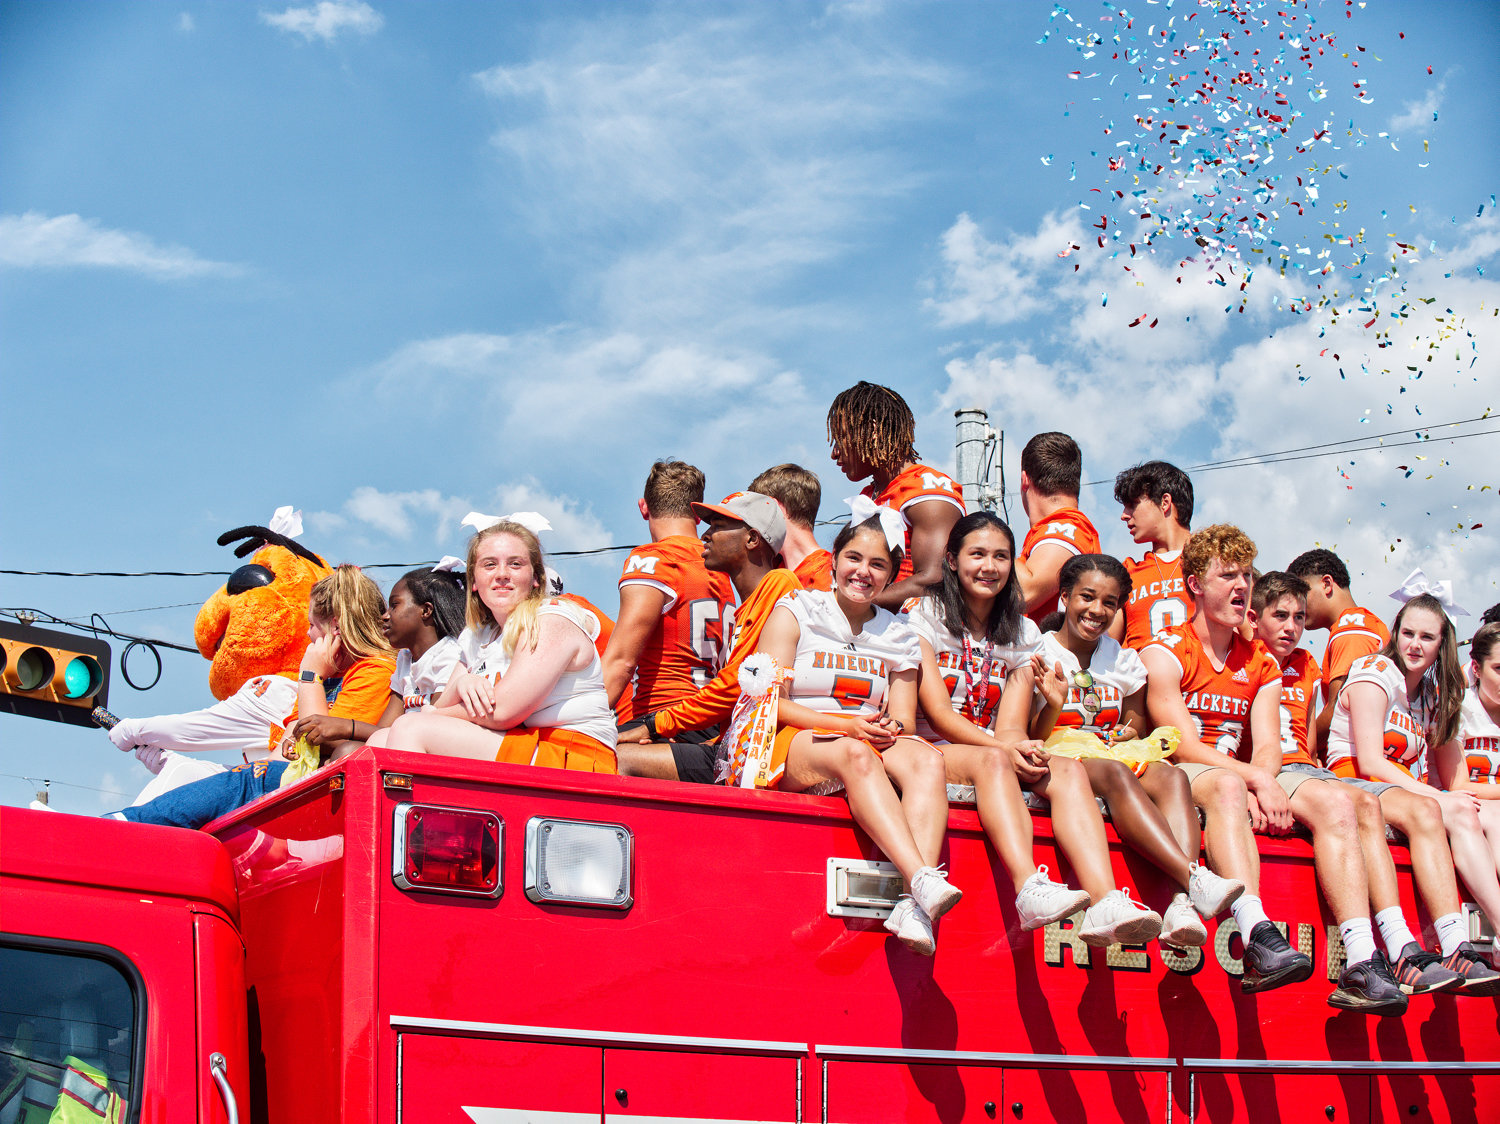 The Mineola High School Homecoming Parade made its way through downtown last Friday afternoon. Aboard a Mineola fire truck were the varsity football players and cheerleaders.